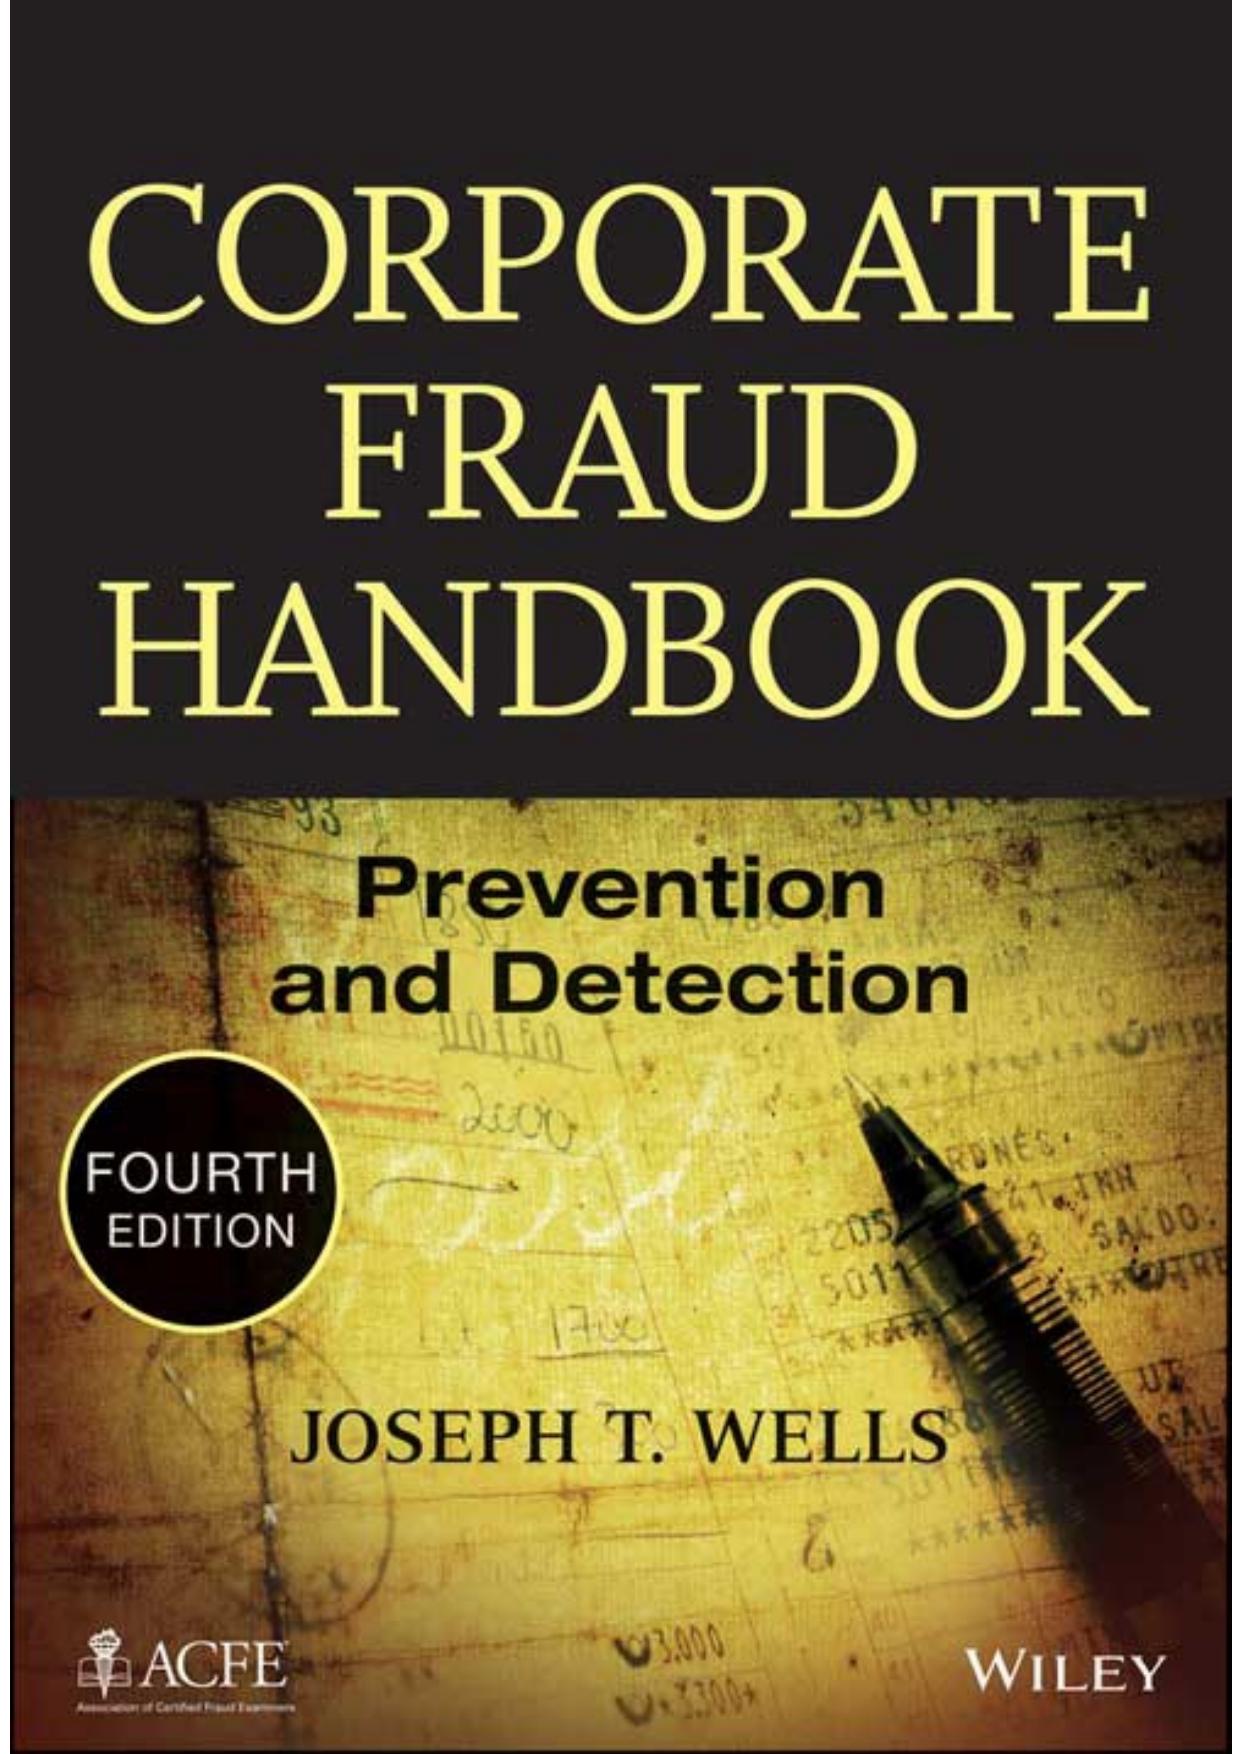 Corporate Fraud Handbook_ Prevention and Detection.jpg